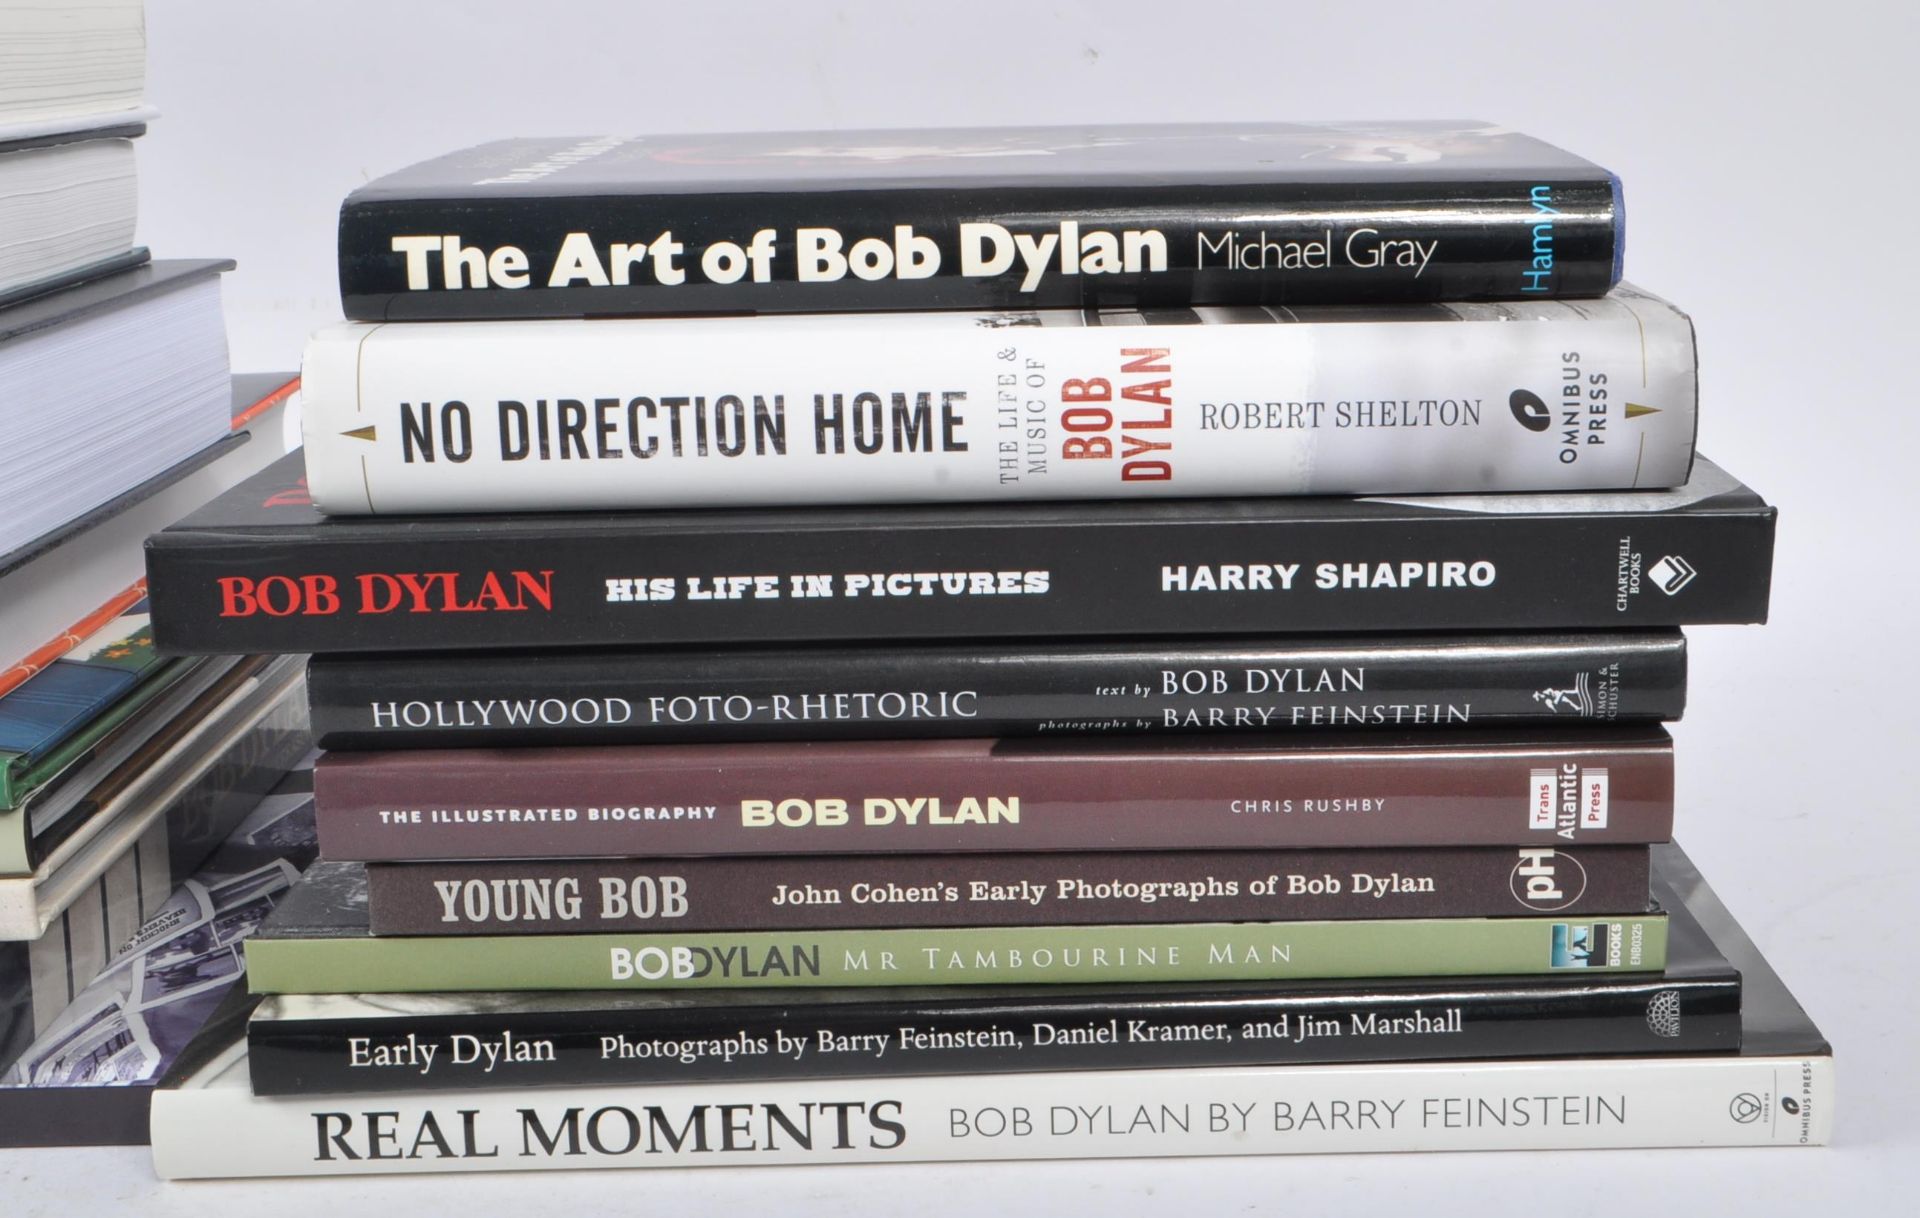 BOB DYLAN - COLLECTION OF MUSIC REFERENCE BOOK - Image 9 of 10